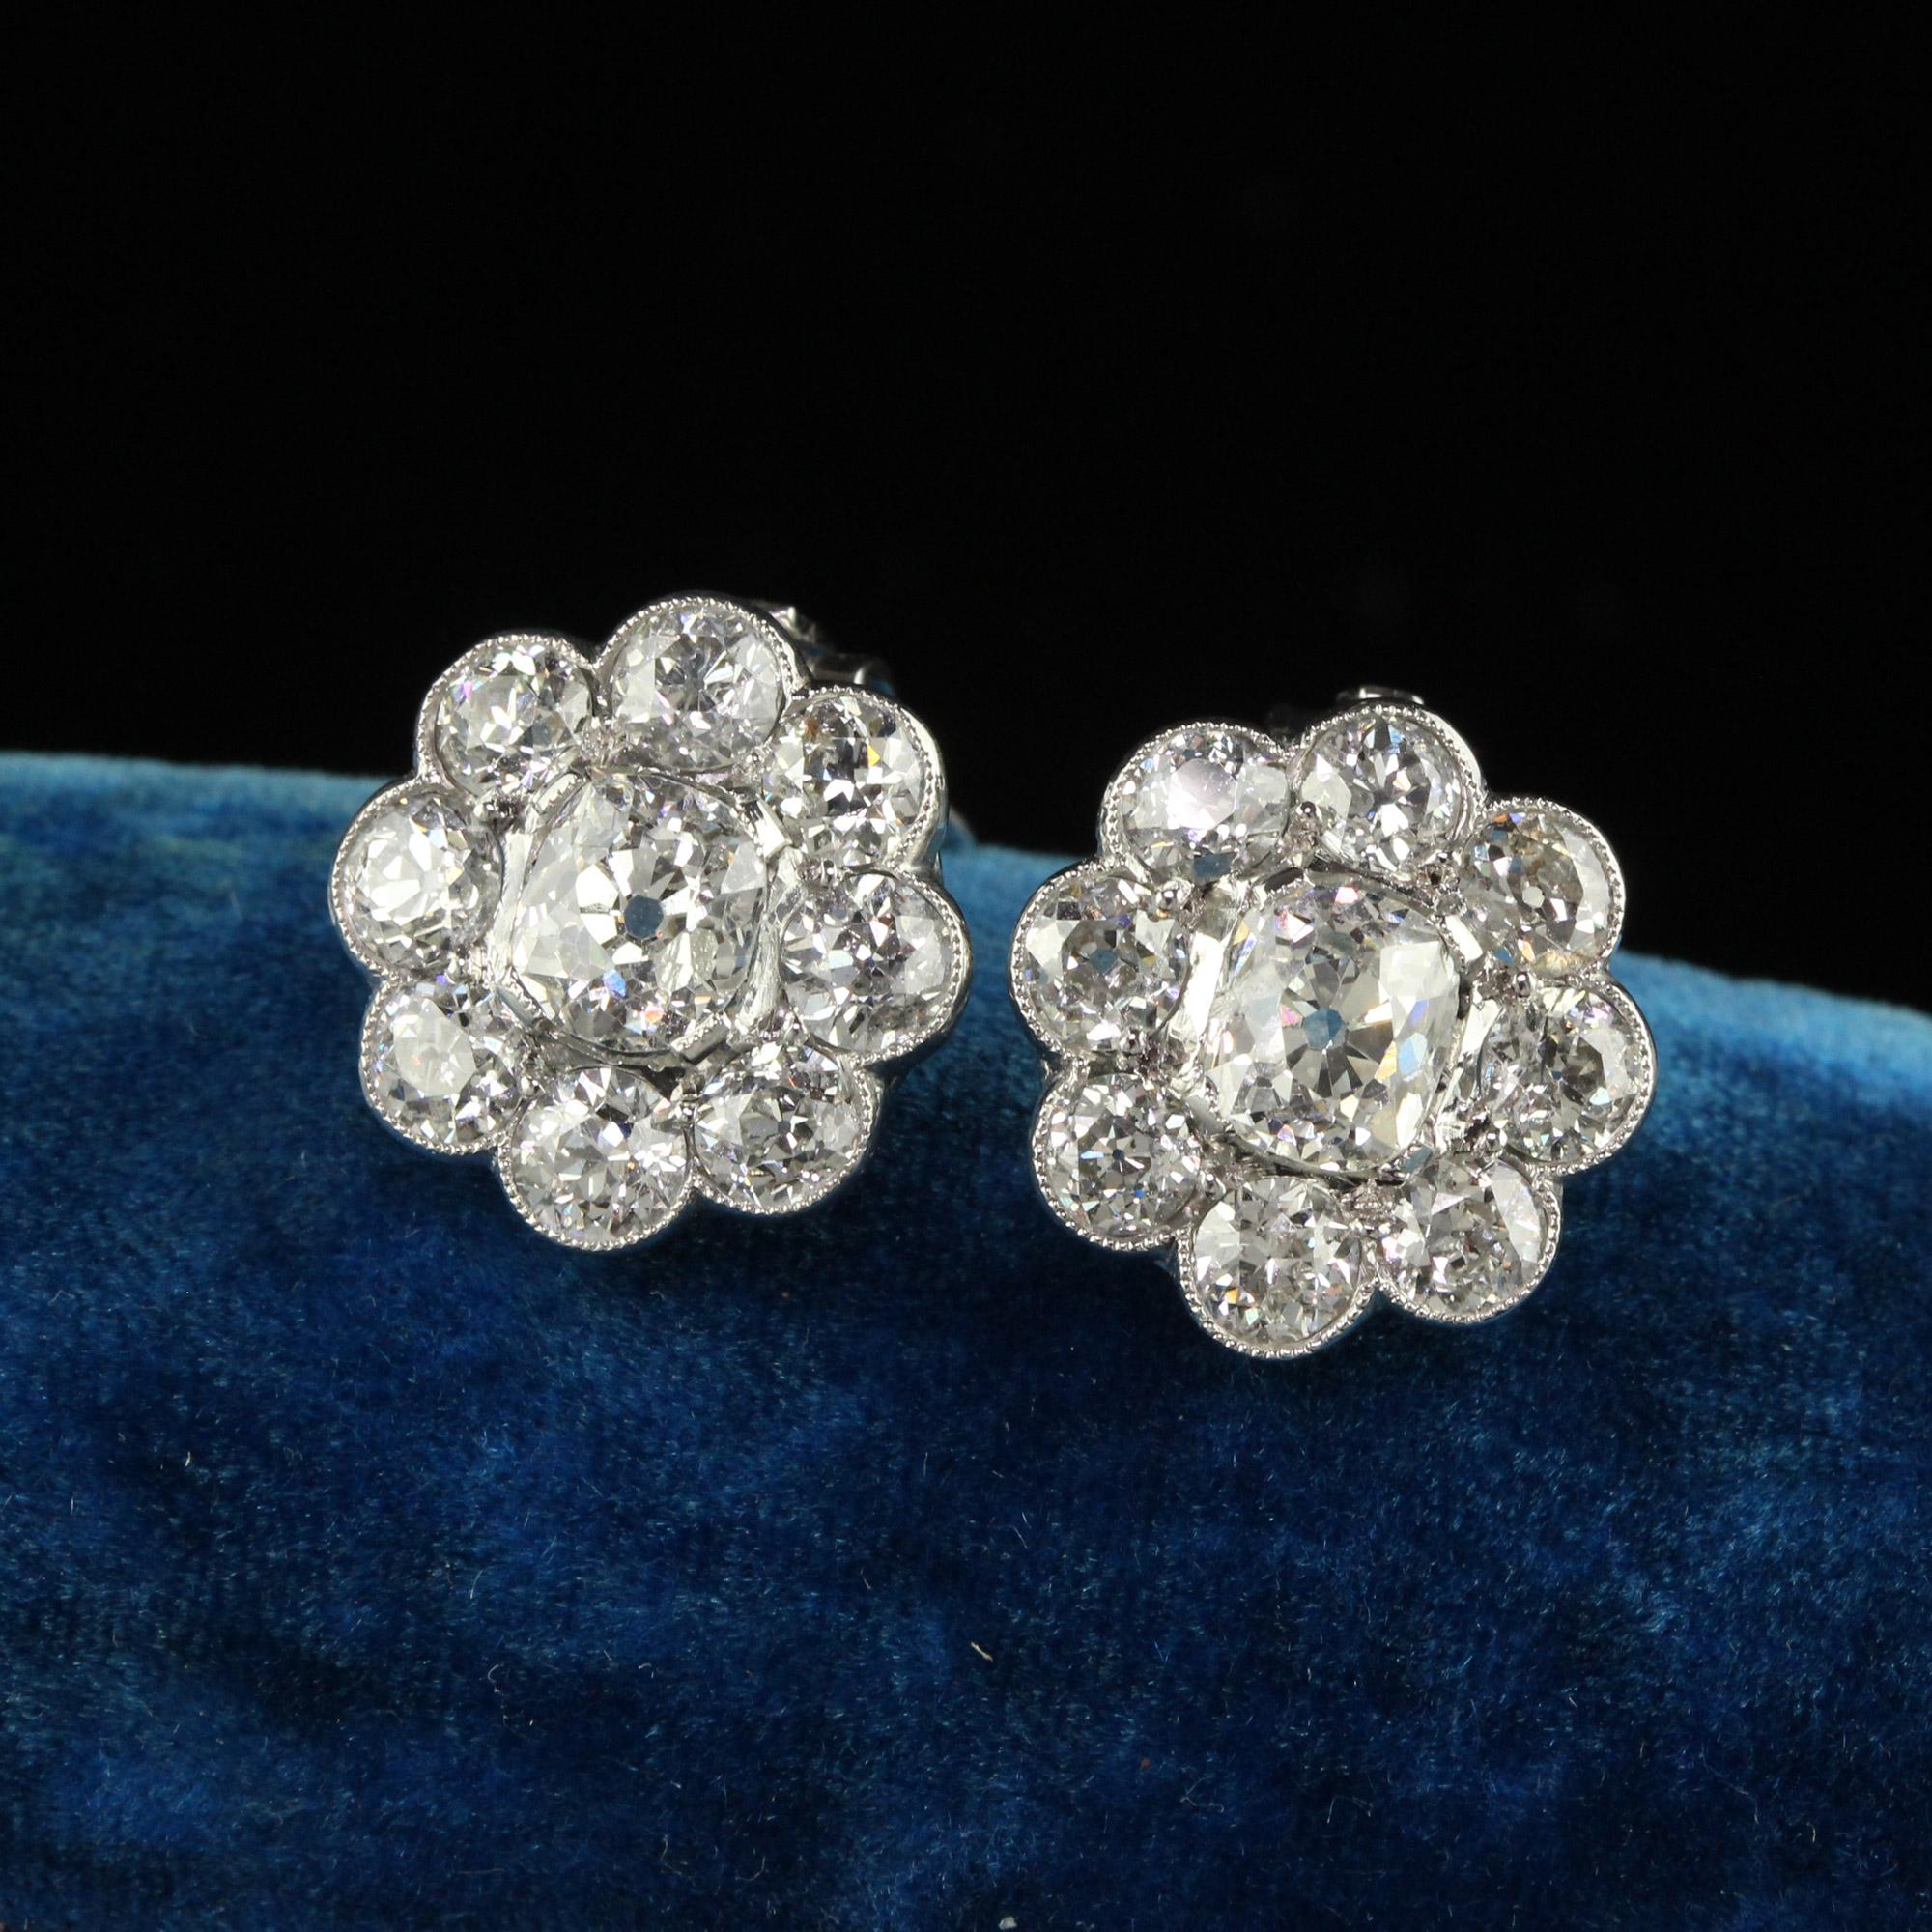 Beautiful Vintage Estate Platinum Old Mine and Old Euro Cut Diamond Flower Cluster Earrings. This gorgeous pair of old mine diamond earrings are crafted in platinum and 18k white gold clip backs. The center of the earrings have chunky elongated old